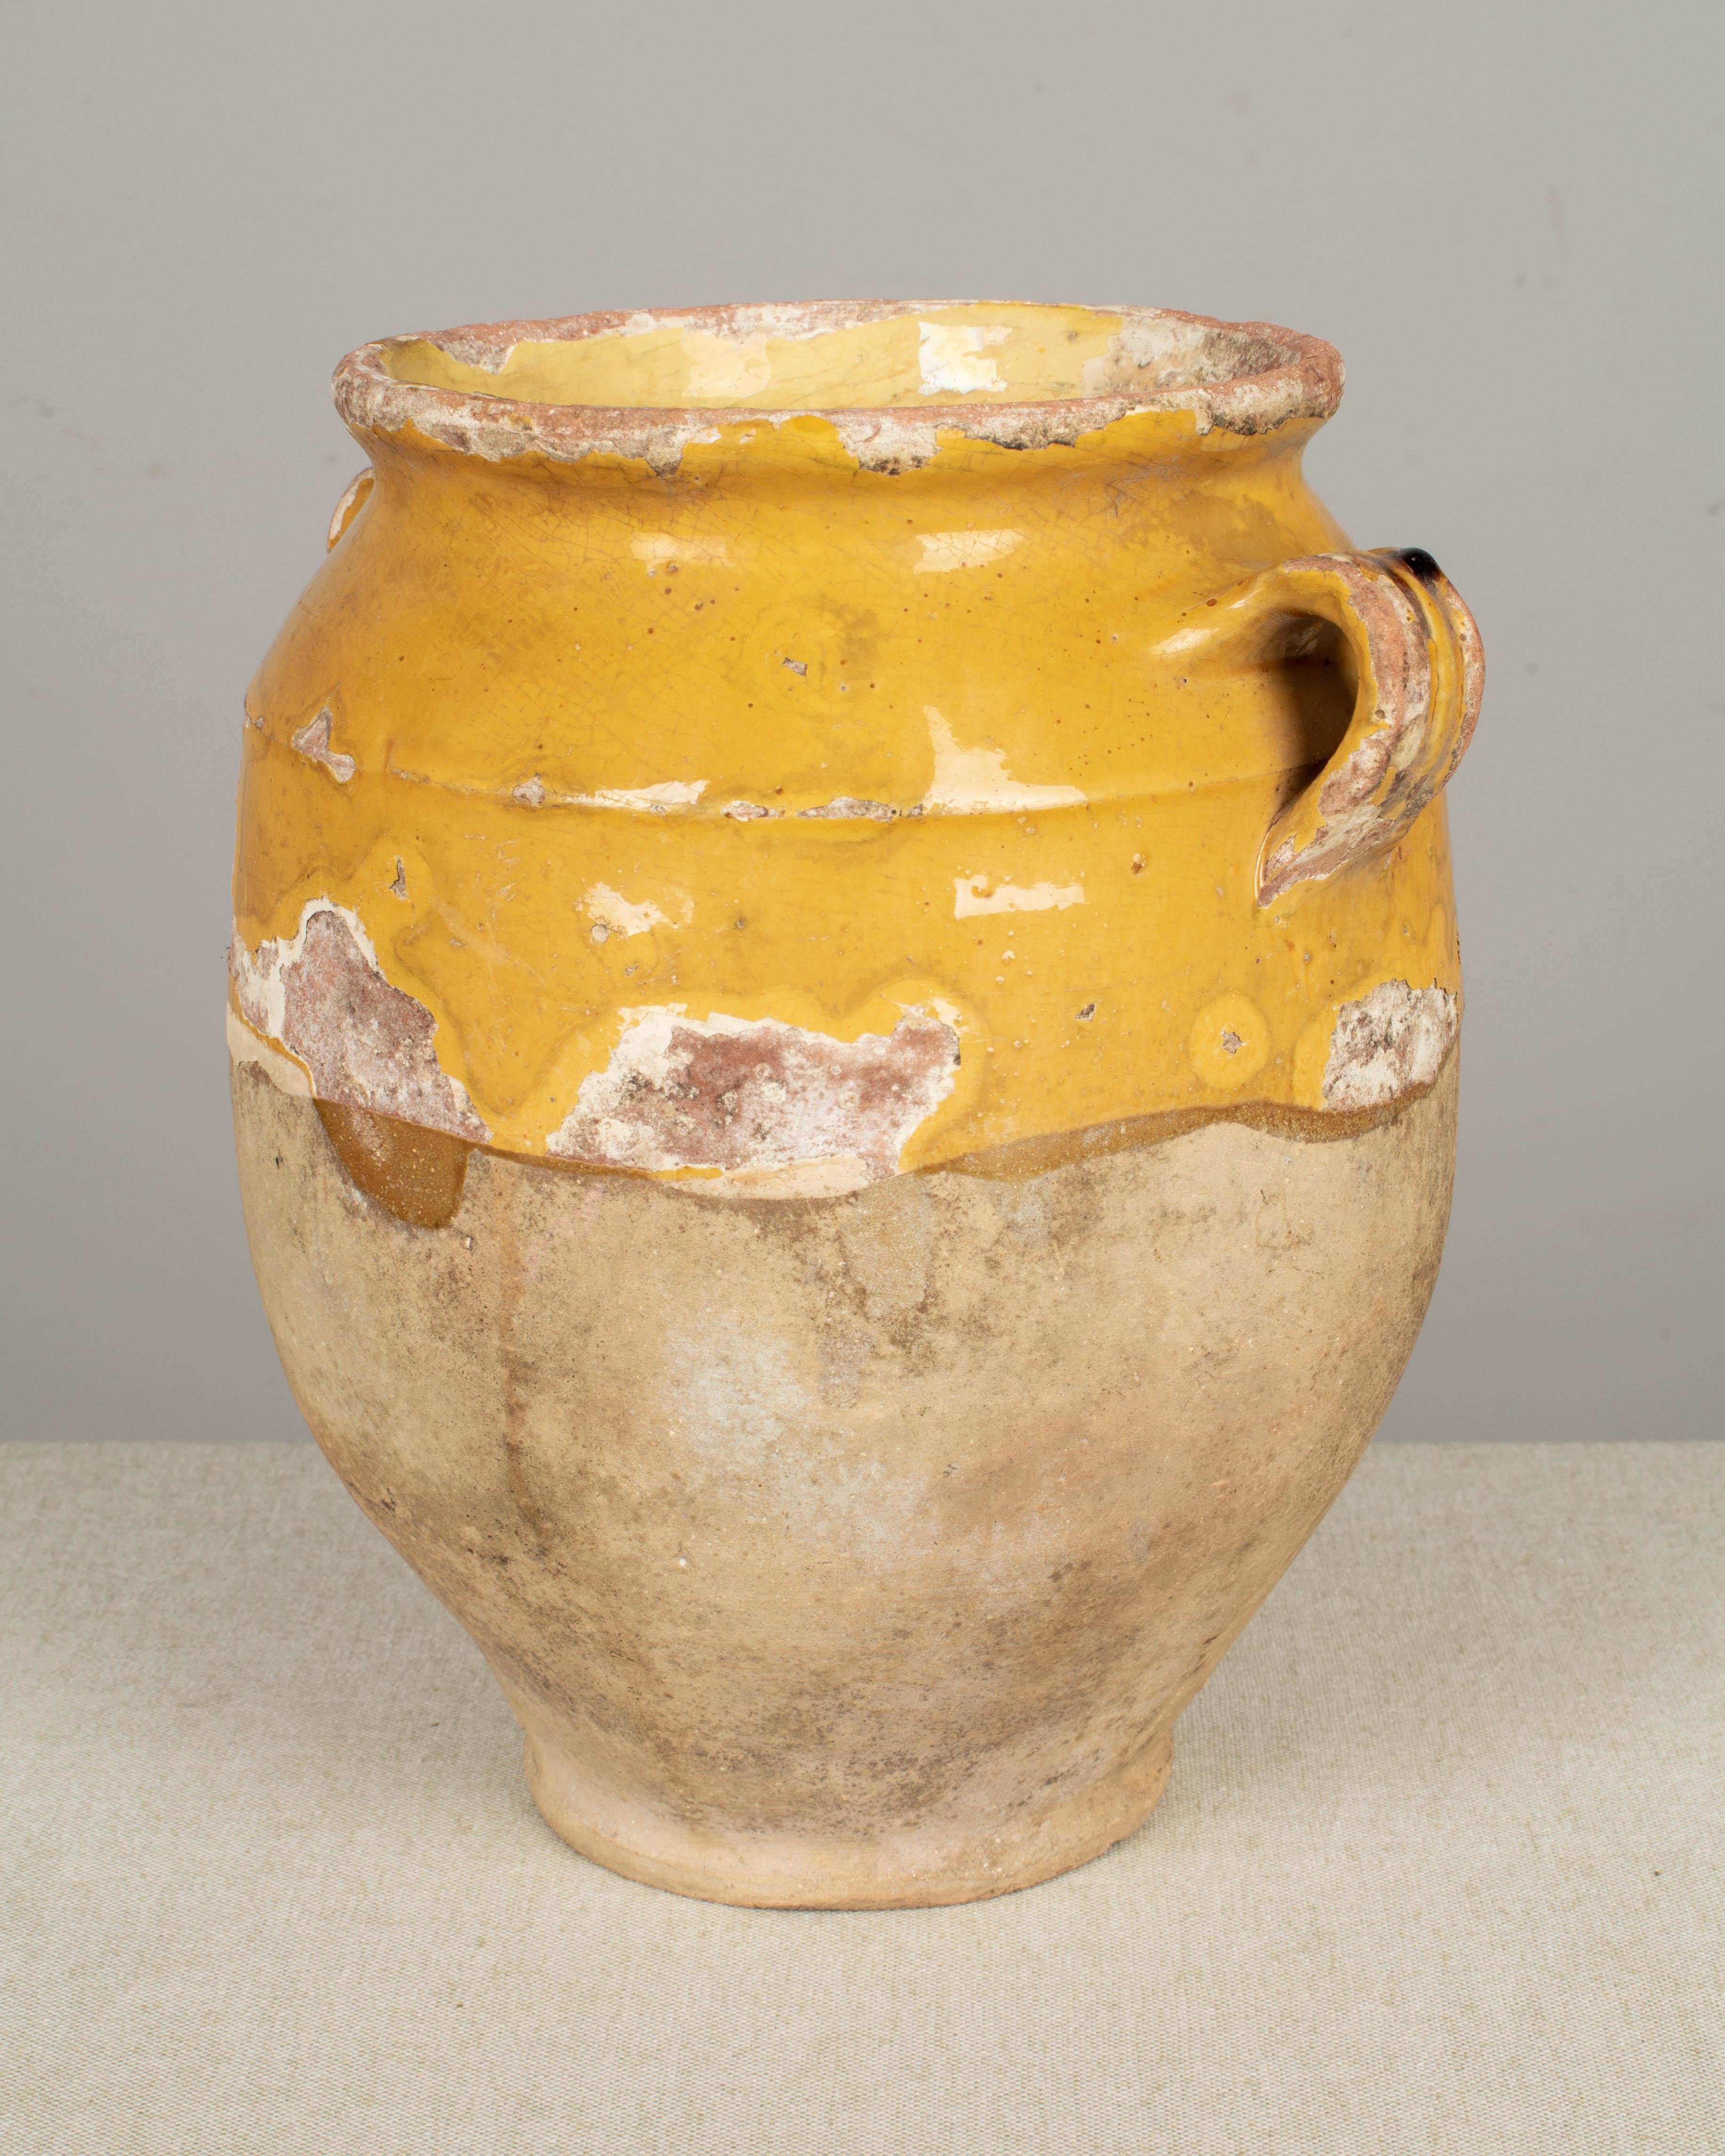 A 19th century earthenware confit pot from the Southwest of France with traditional yellow glaze. Chips and losses to glaze. These ordinary earthenware vessels were once used daily in the French country home and have beautiful rustic glazes of